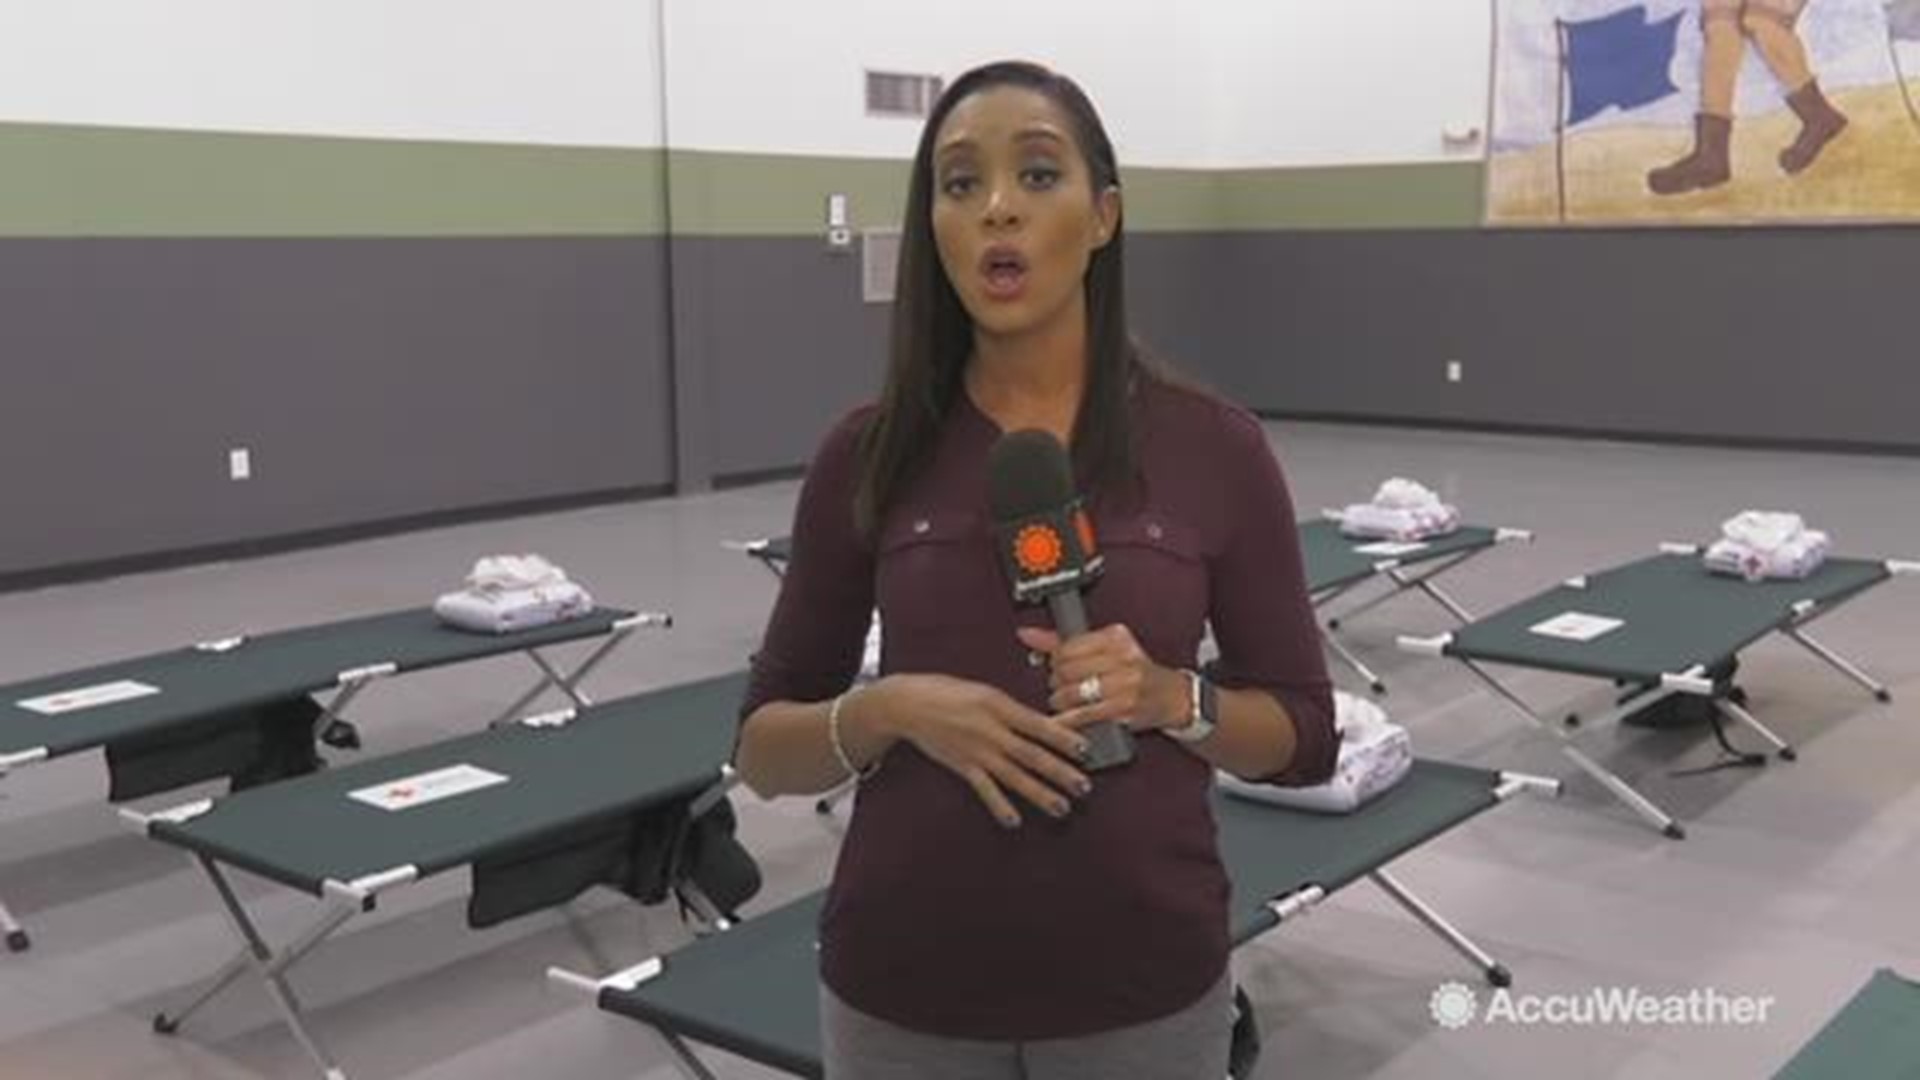 Six shelters have opened up as floodwaters continue to rise after torrential rainfall from Florence.  AccuWeather's Kena Vernon visited one of these shelters to hear from the people setting these temporary shelters for flood evacuees.